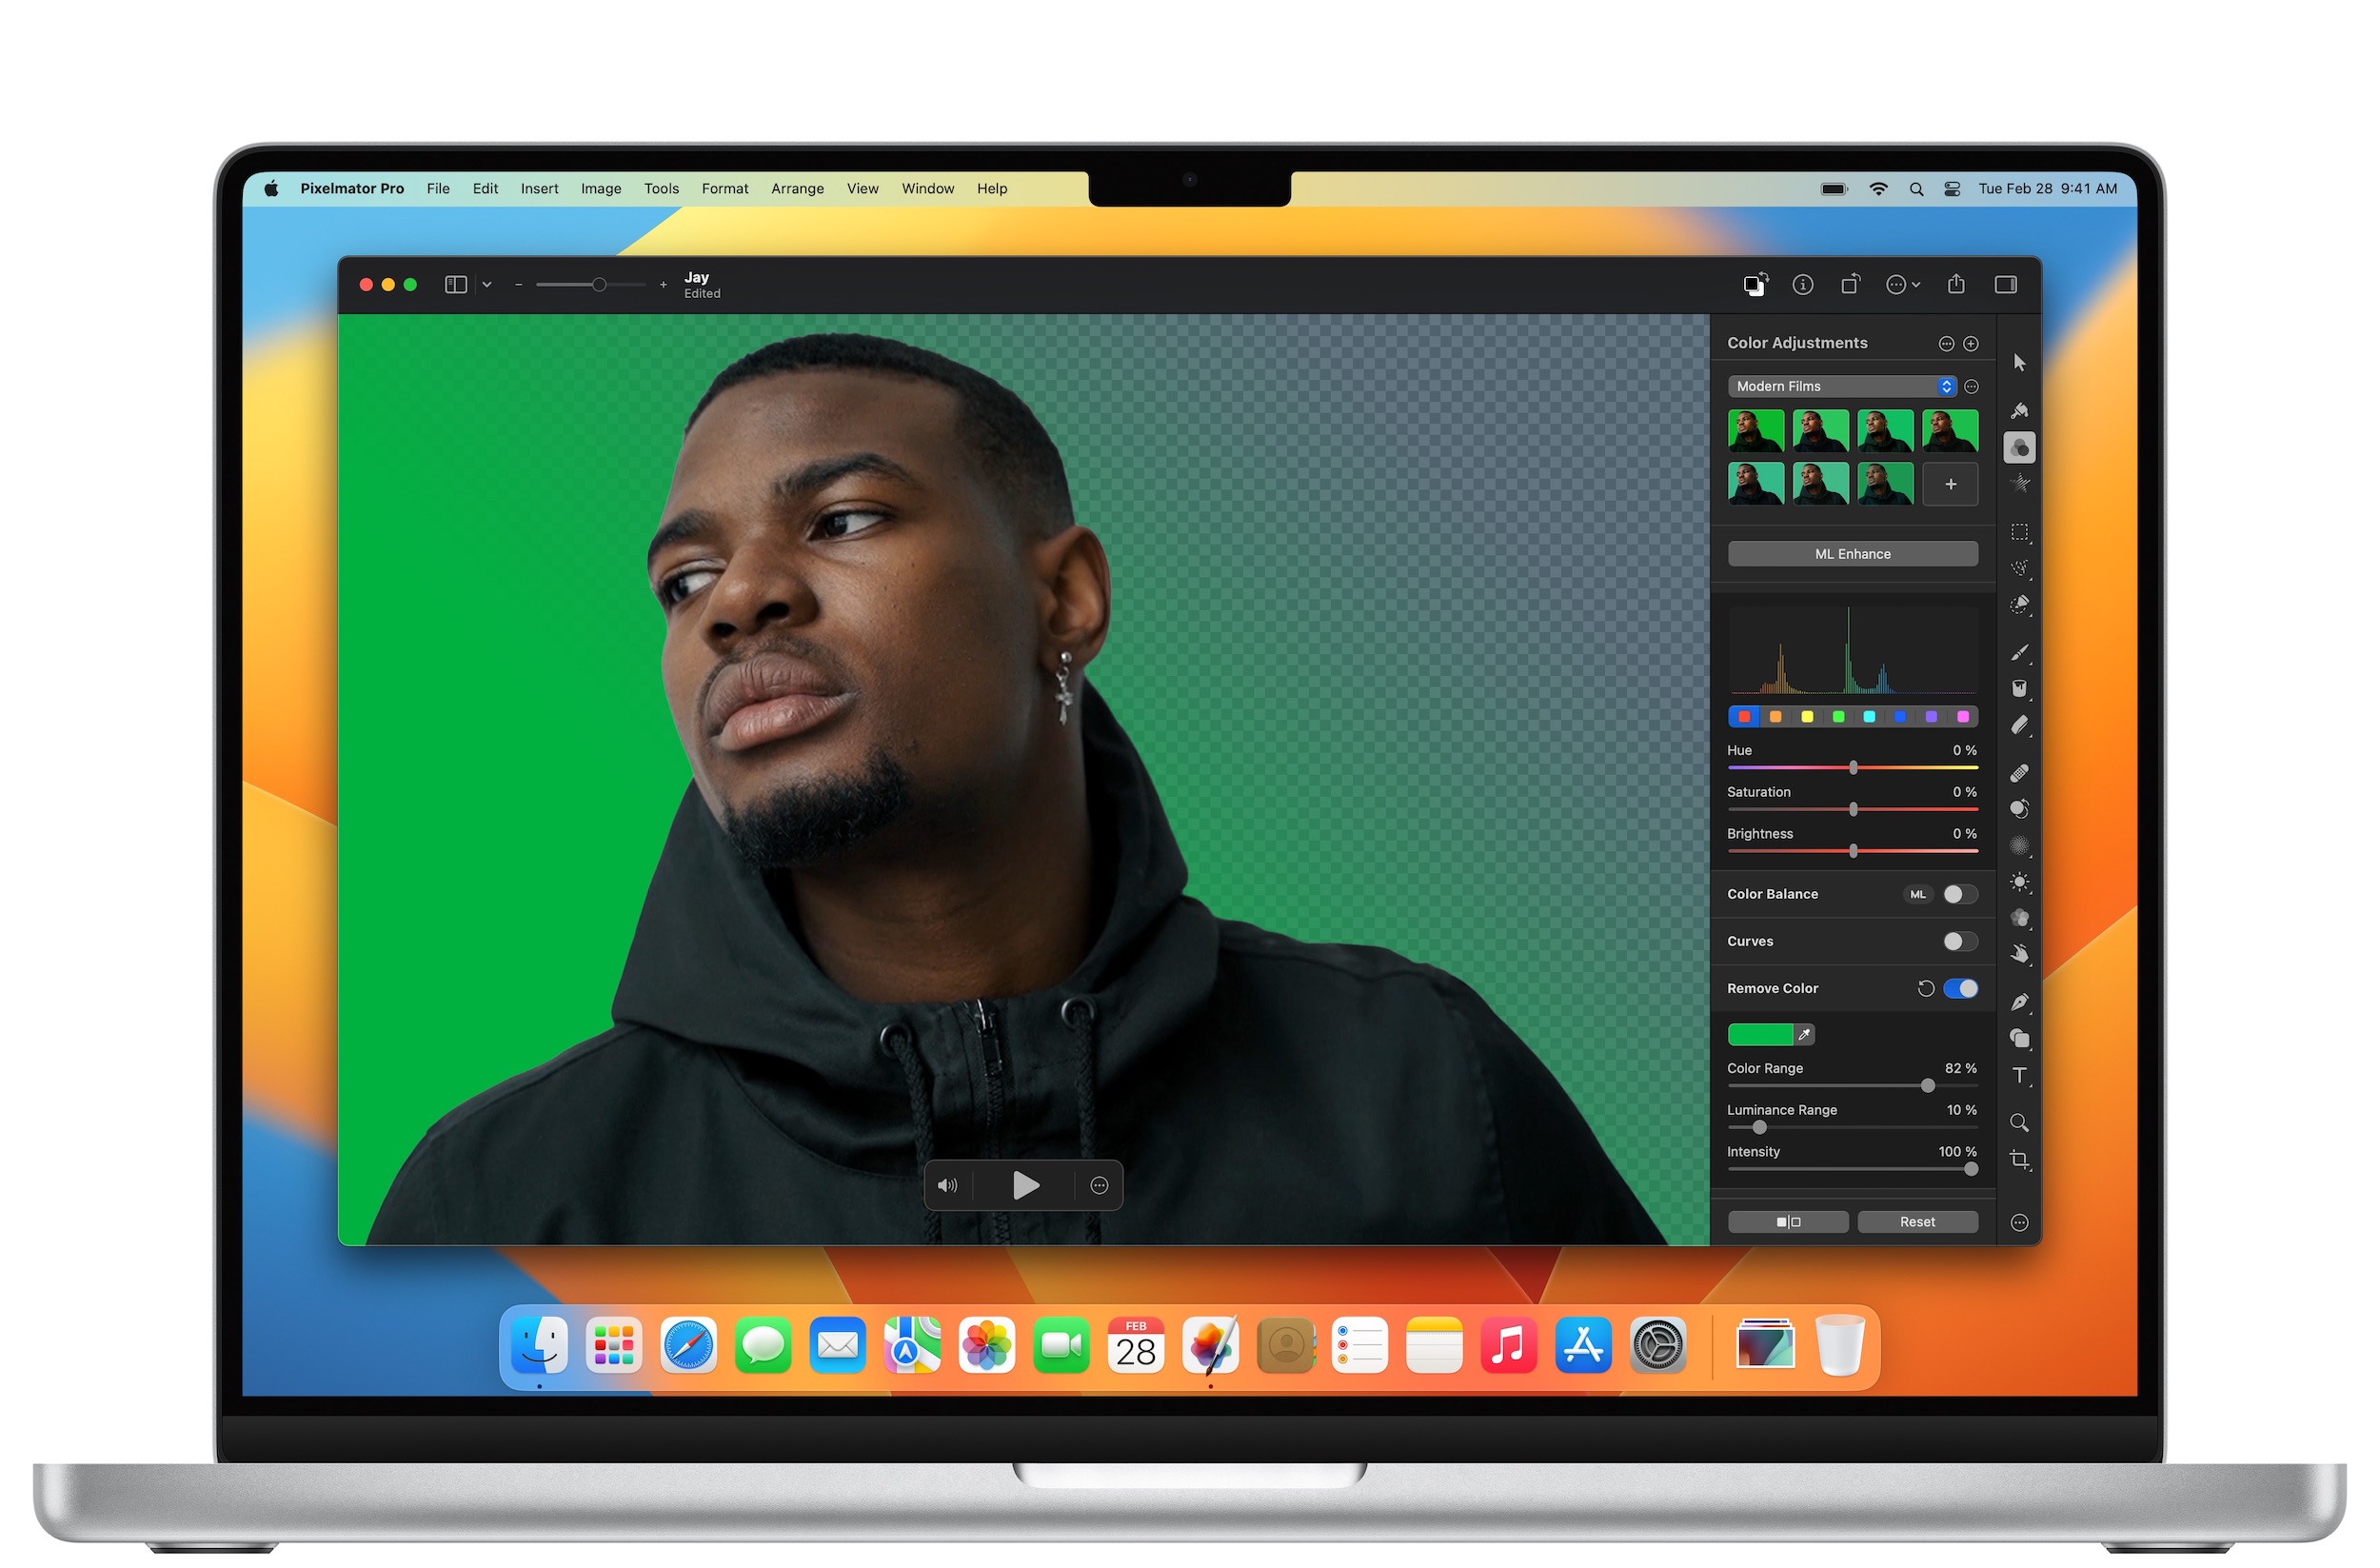 Top 7 Best Free Photo Editing Software for Mac (Updated 2022)